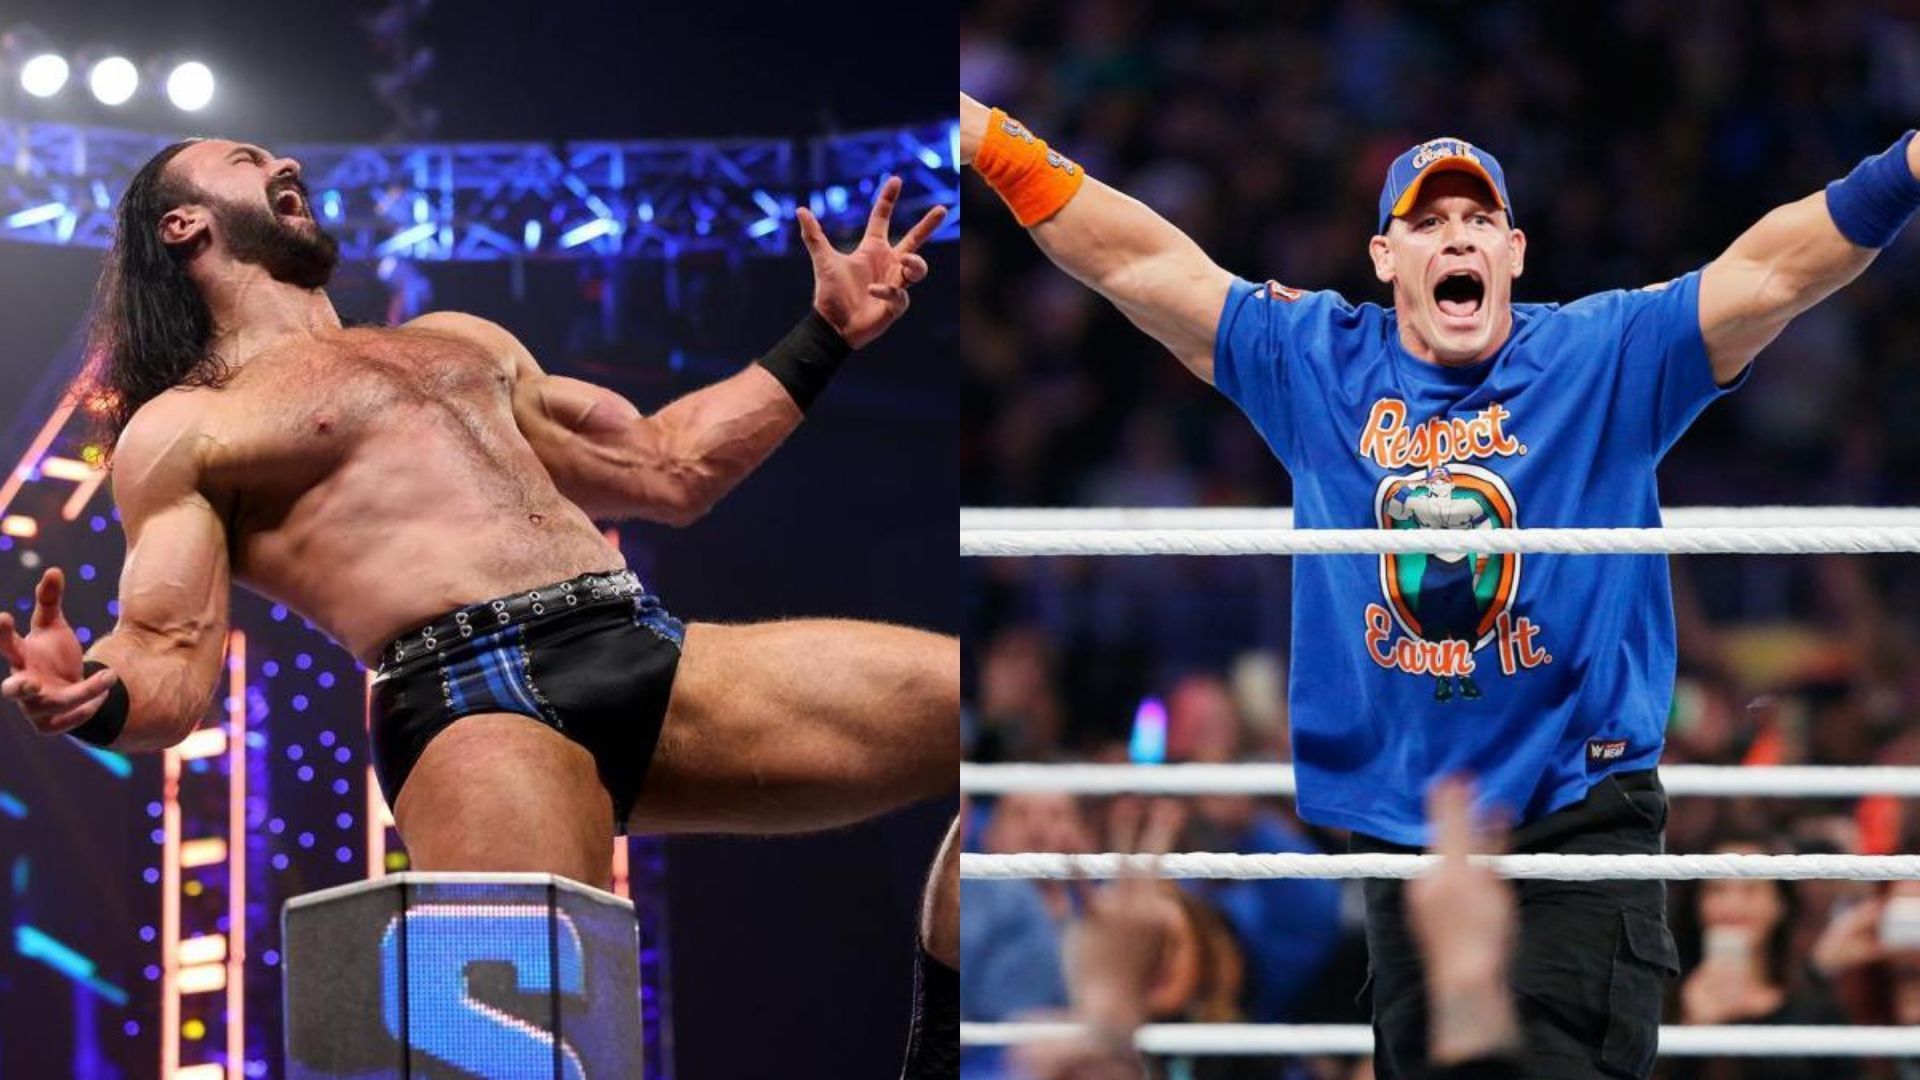 The Scottish Warrior is on the same side as the Cenation Leader